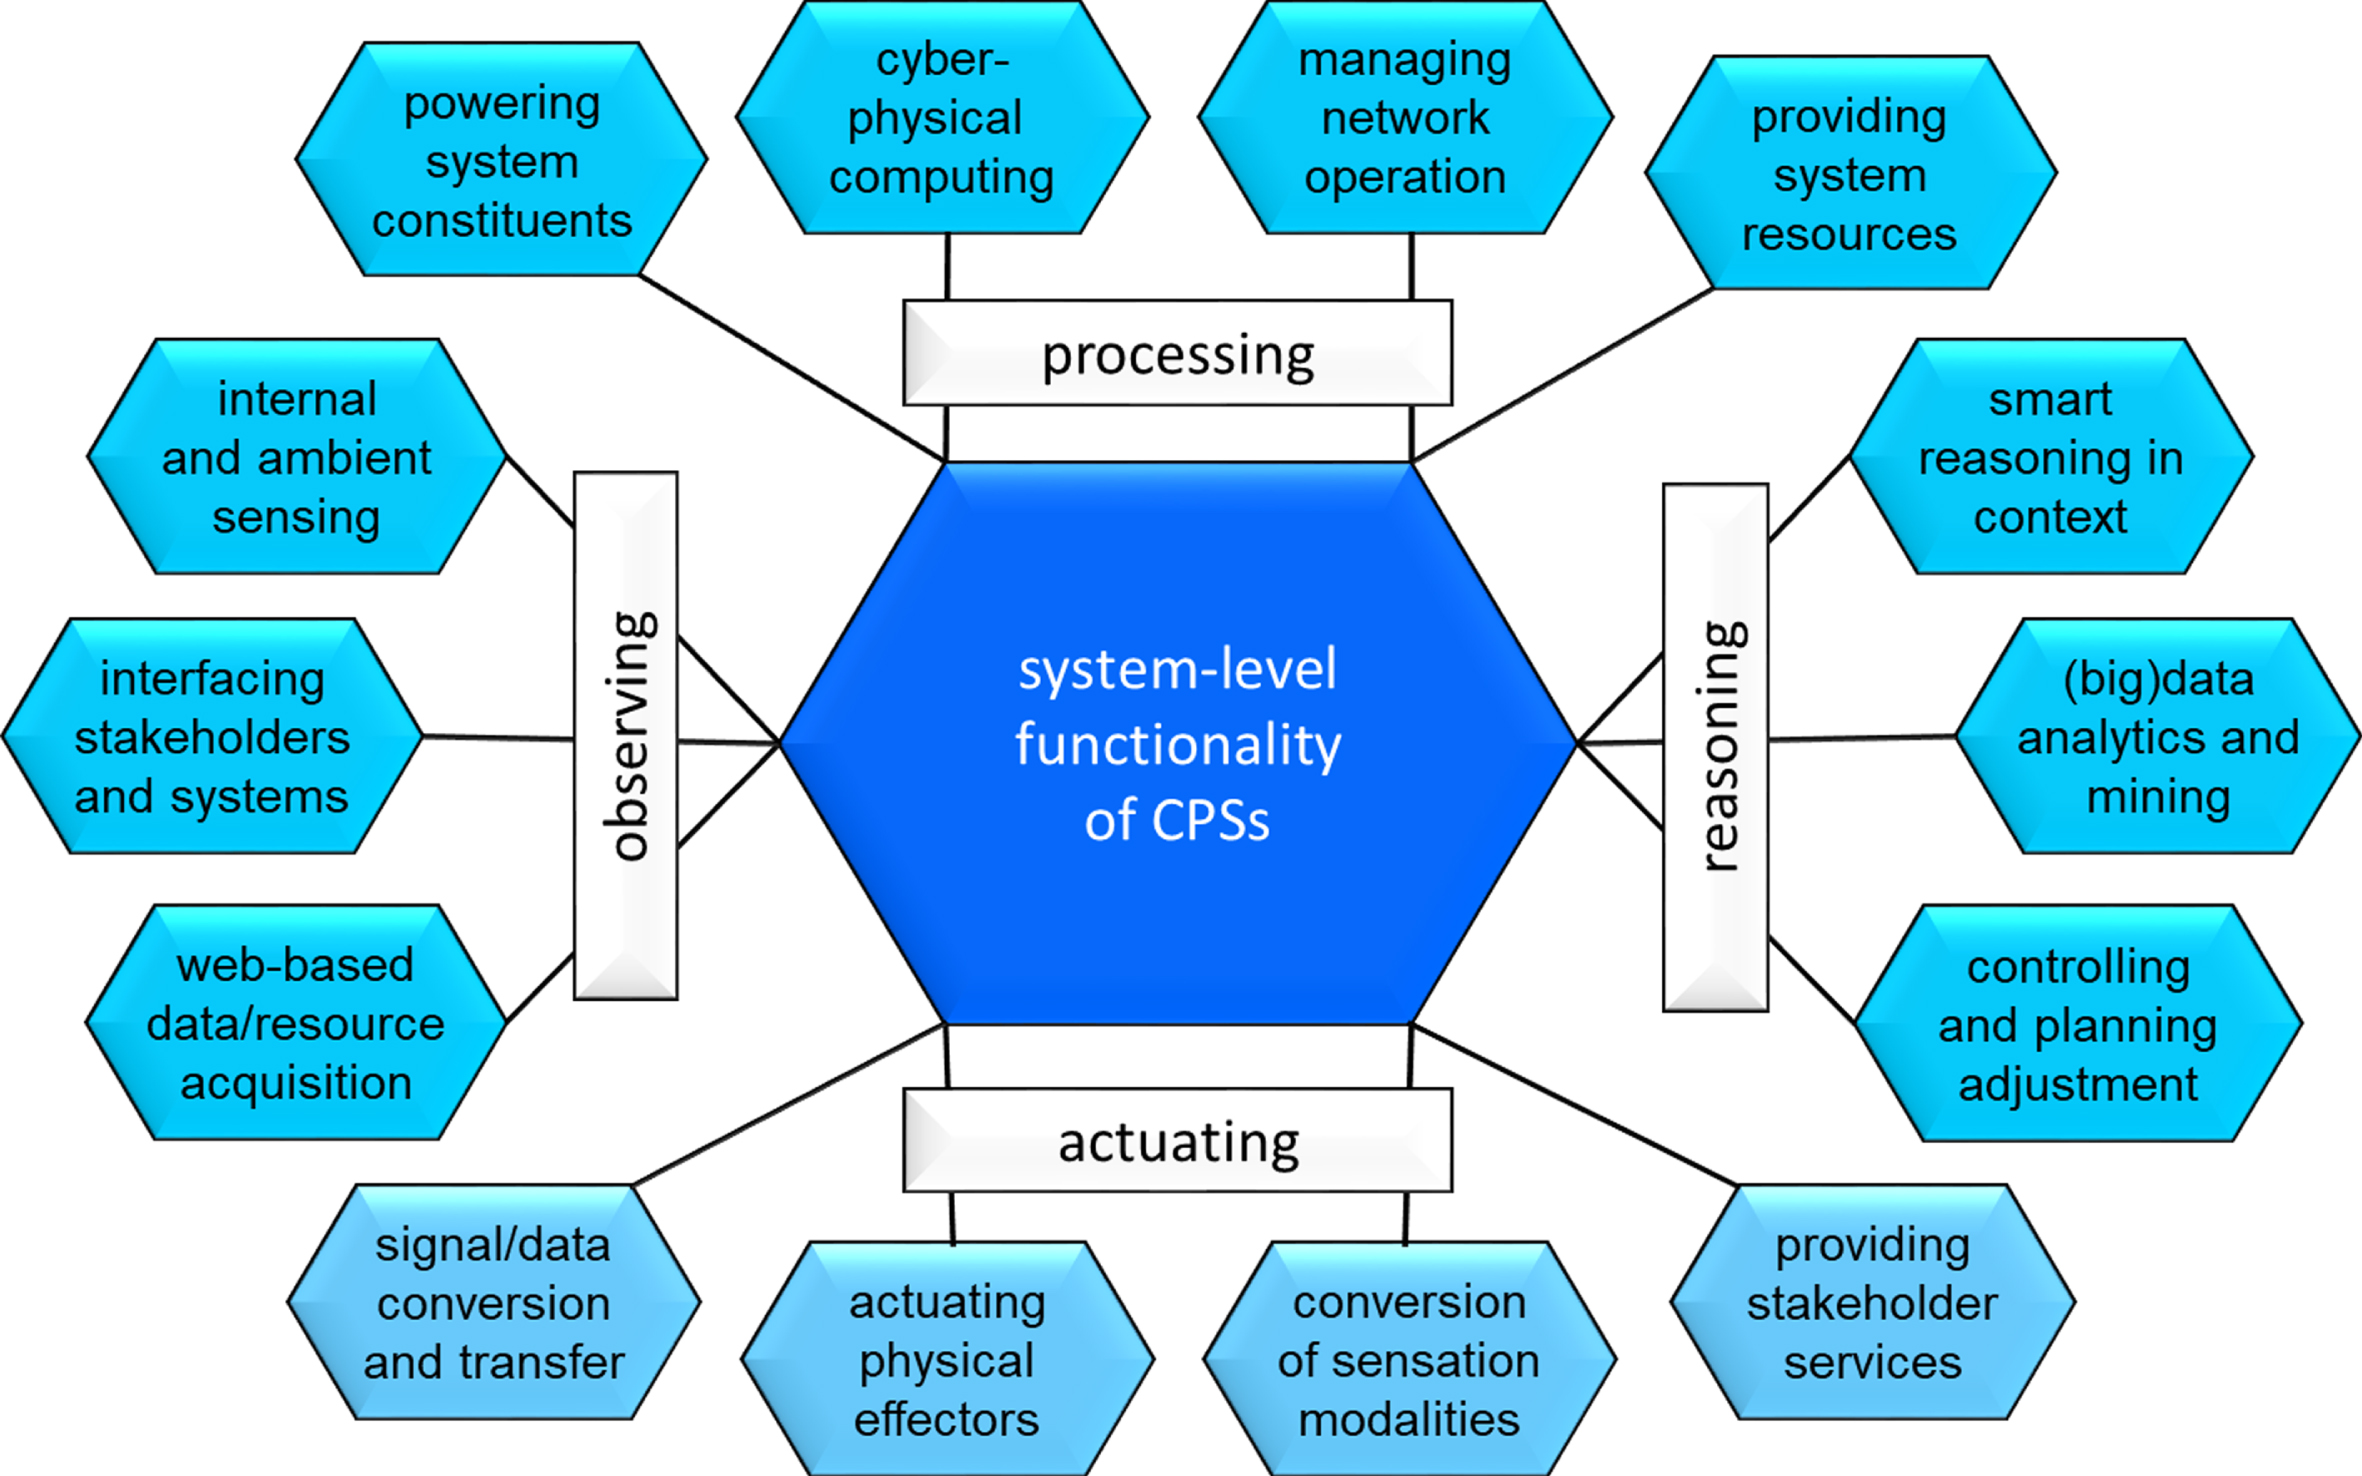 System-level functional model of CPSs from a computational perspective.